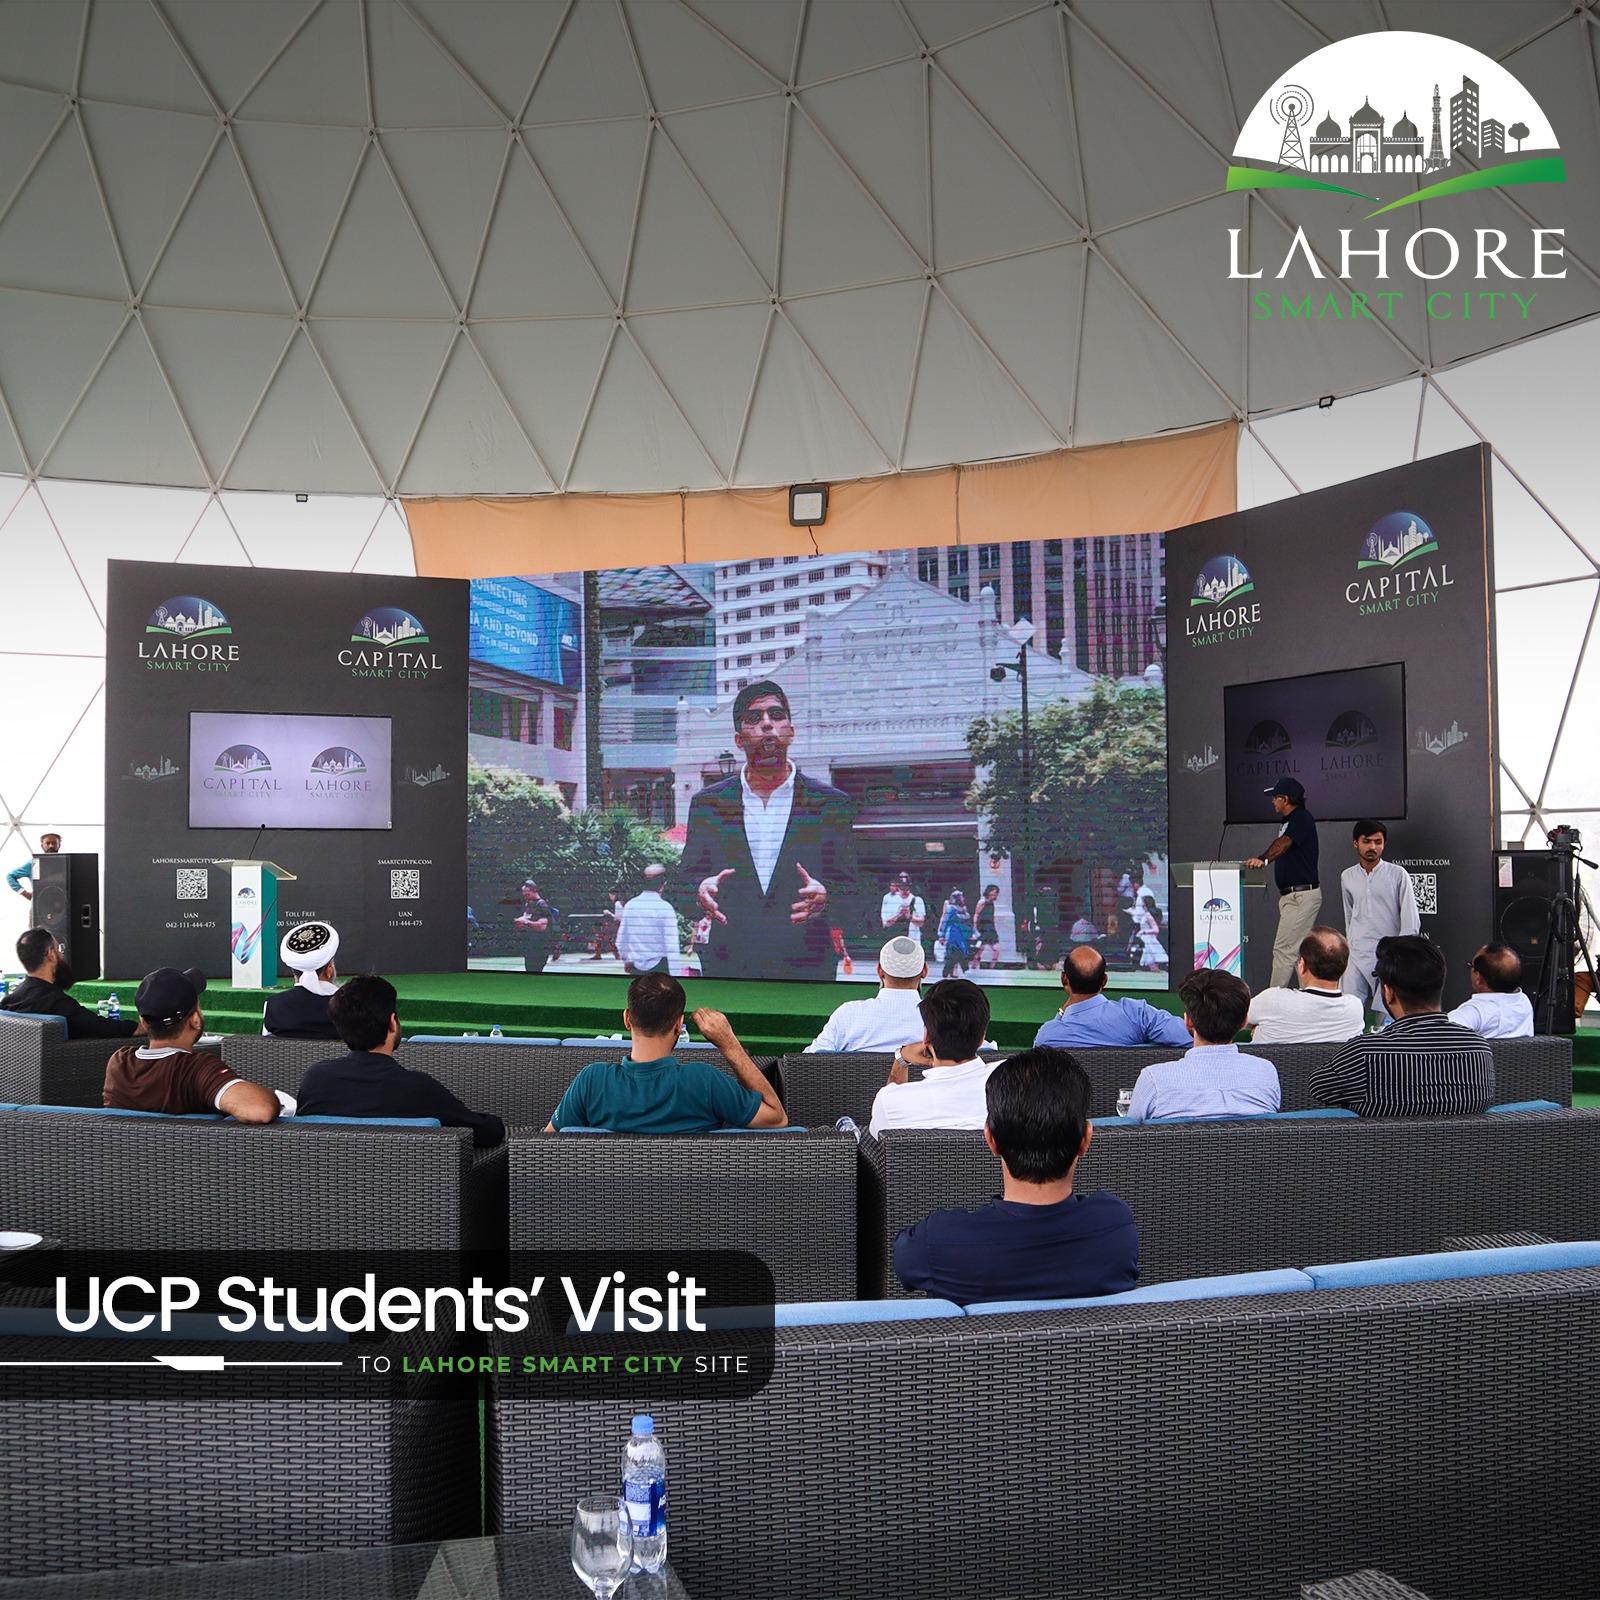 UCP students visit to the Lahore Smart City